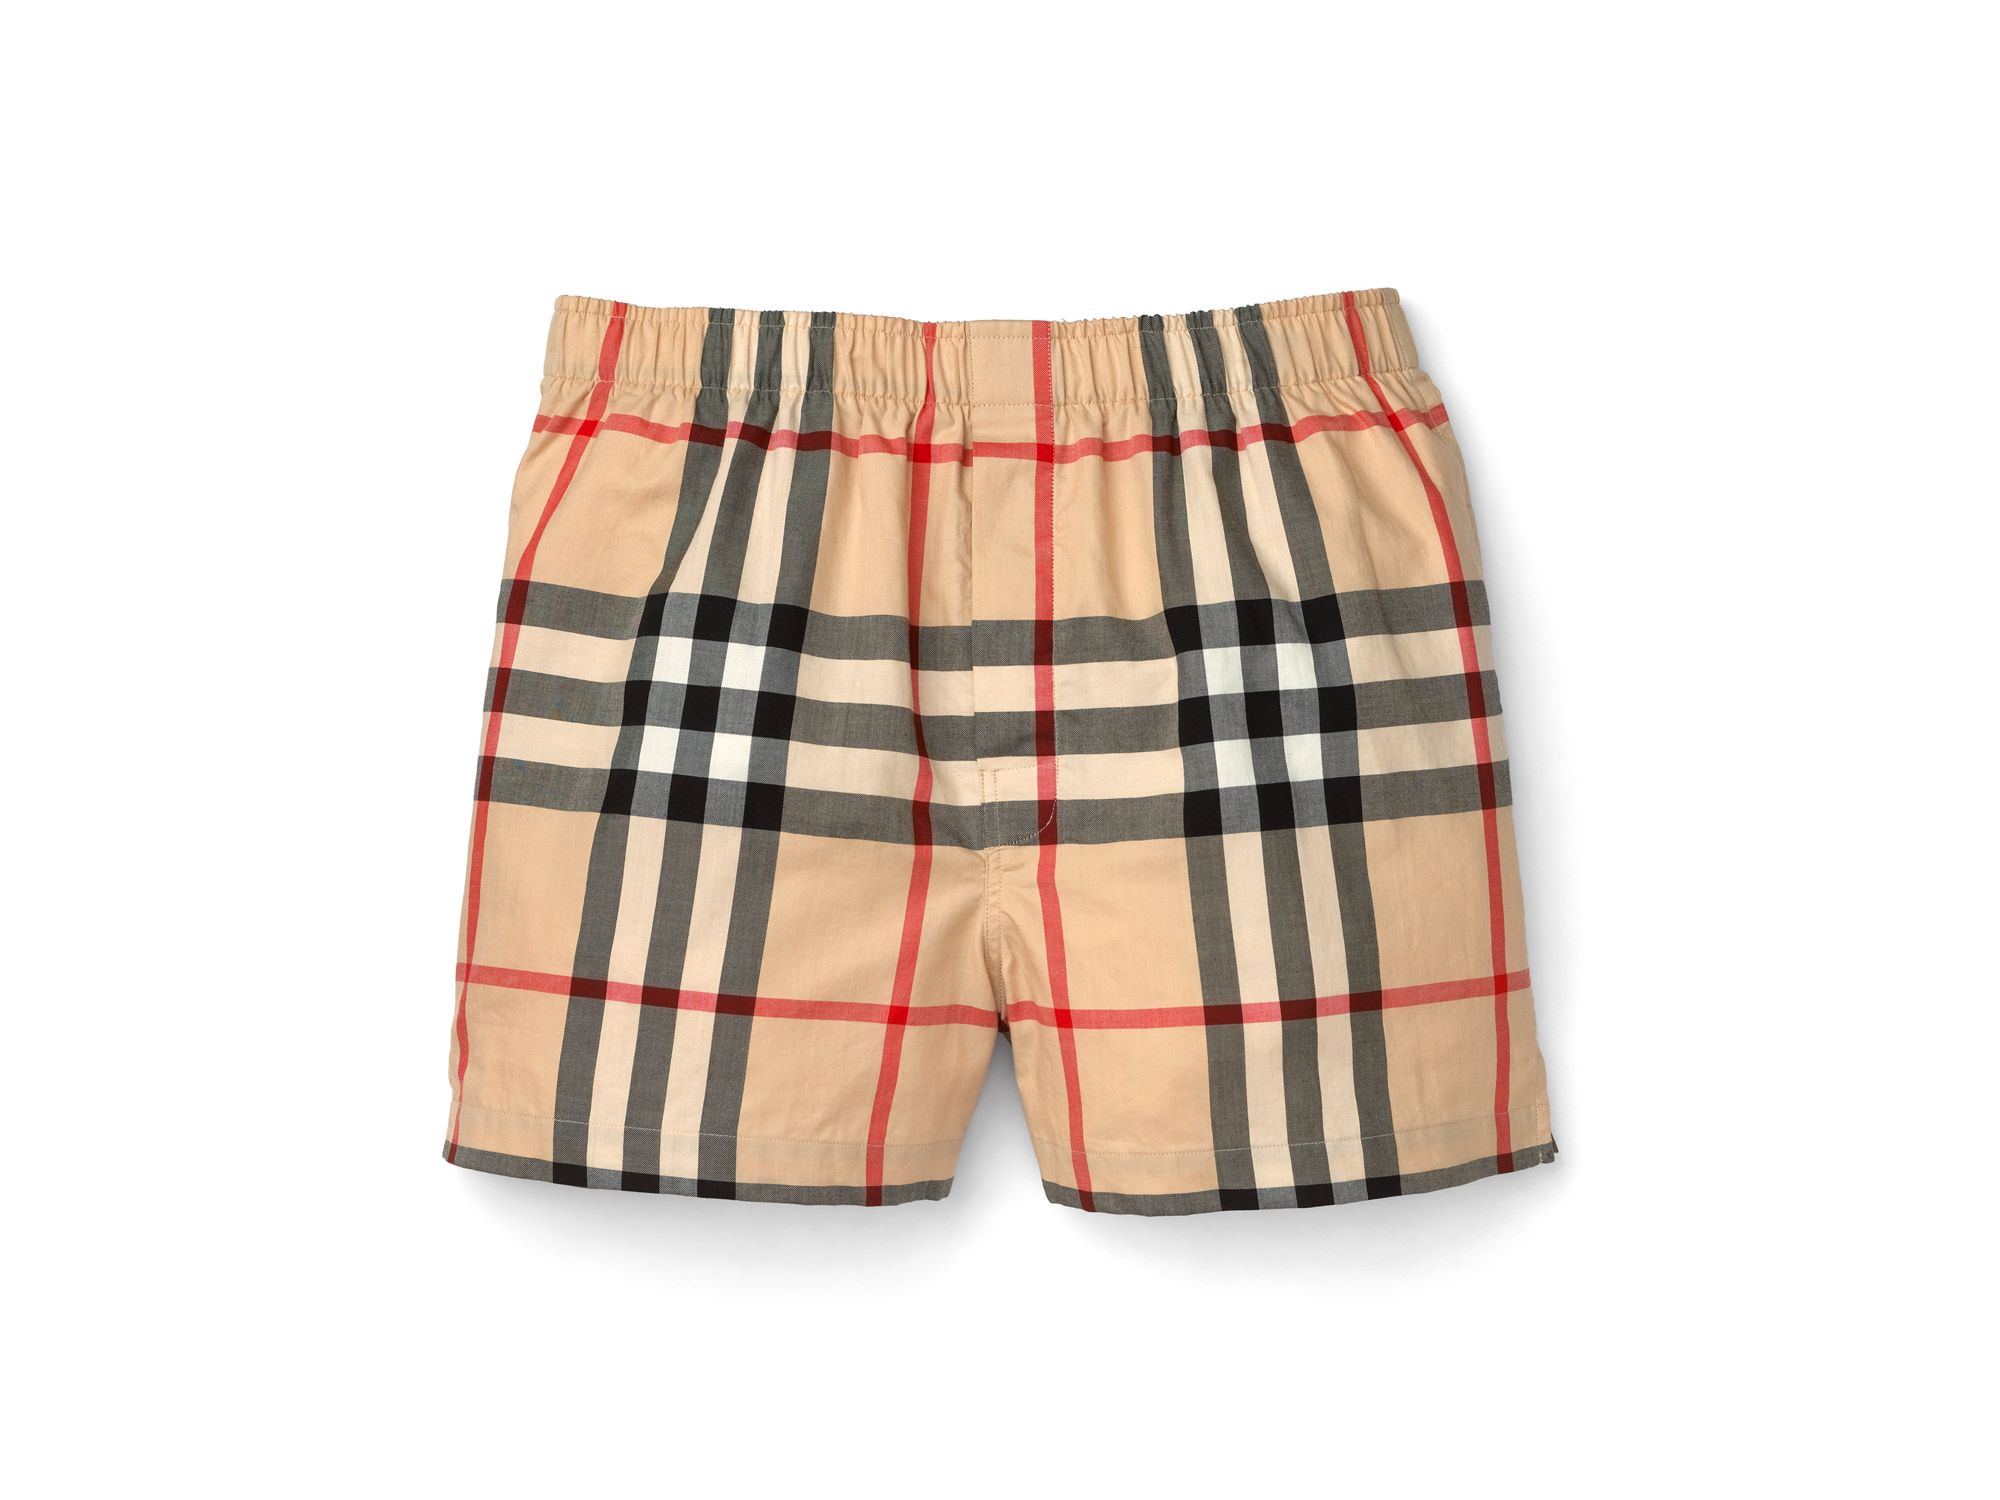 Lyst - Burberry Check Woven Boxers in Brown for Men